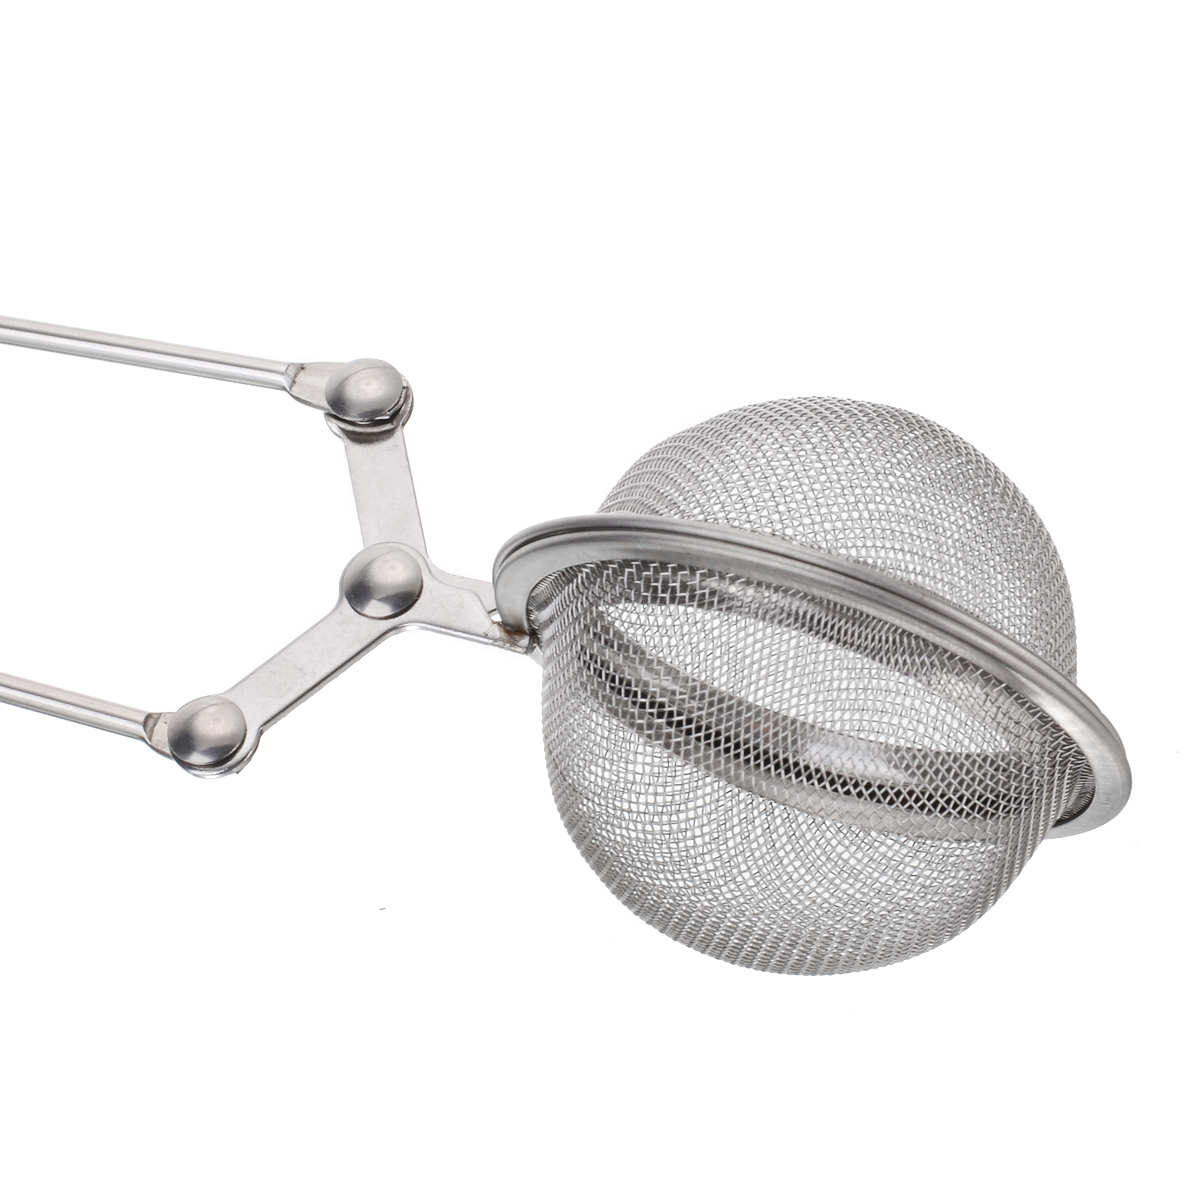 Mayitr 1pcs Stainless Steel Tea Infuser Mesh Spice Infuser Herb Tea Filter Strainer Handle Mesh Ball Spoon for Home Kitchen